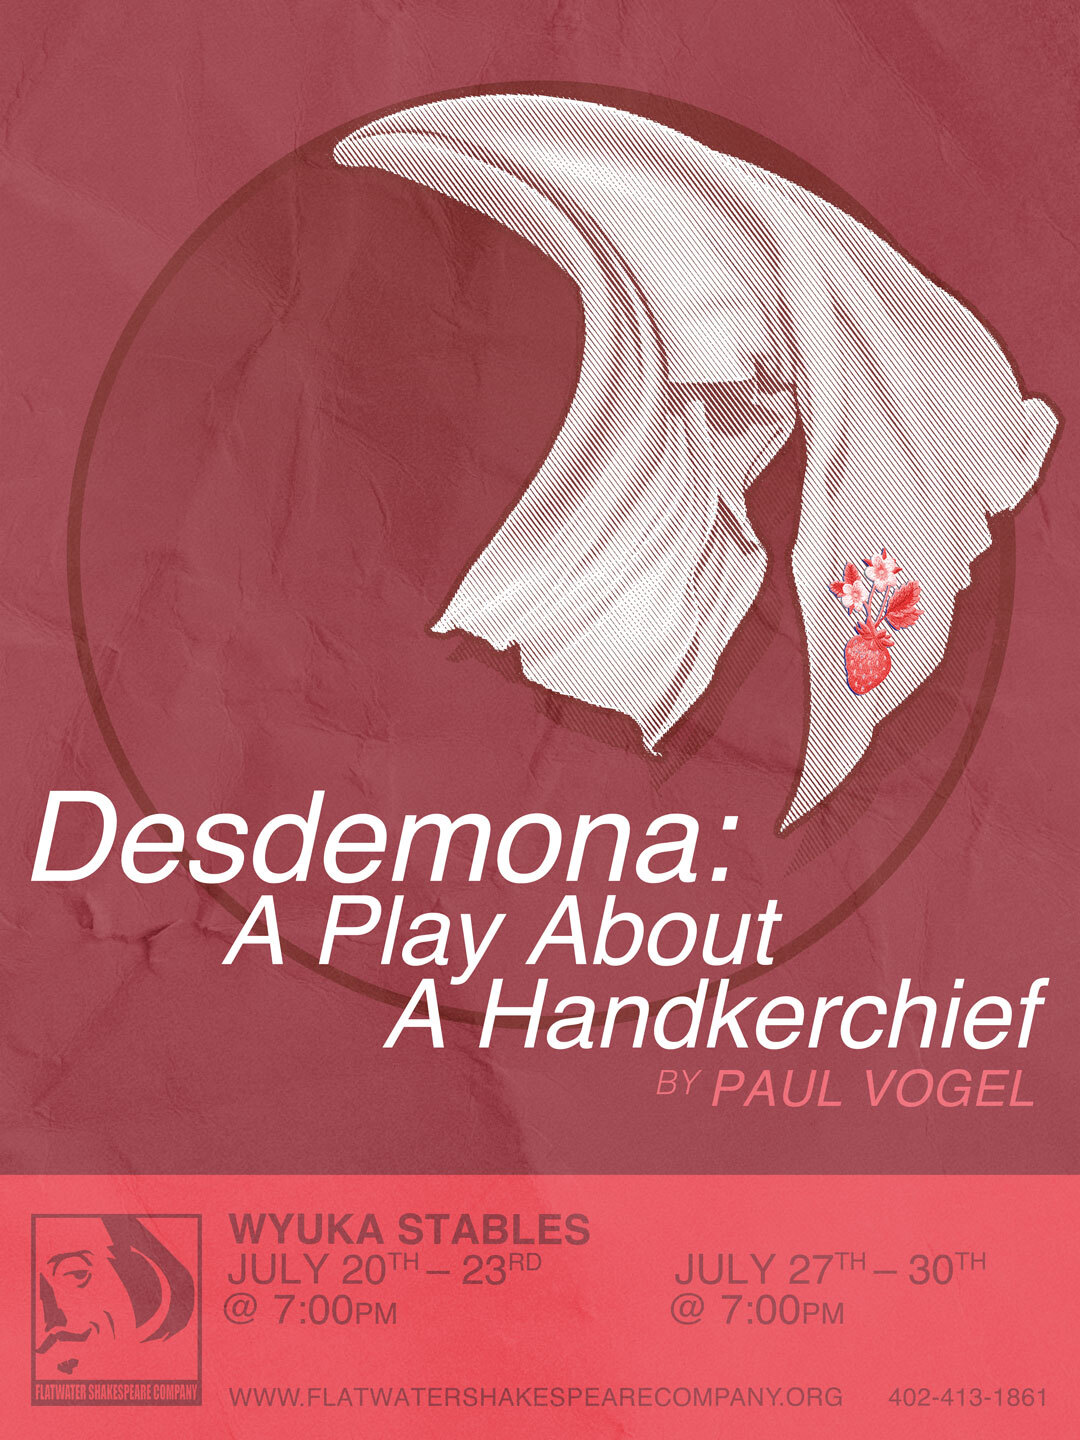 7/30 ADU - ADULT: Sun. July 30, 2023 | 7:00 p.m. - 10:00 p.m. CST | Wyuka Stables (Desdemona: A Play about a Handkerchief)